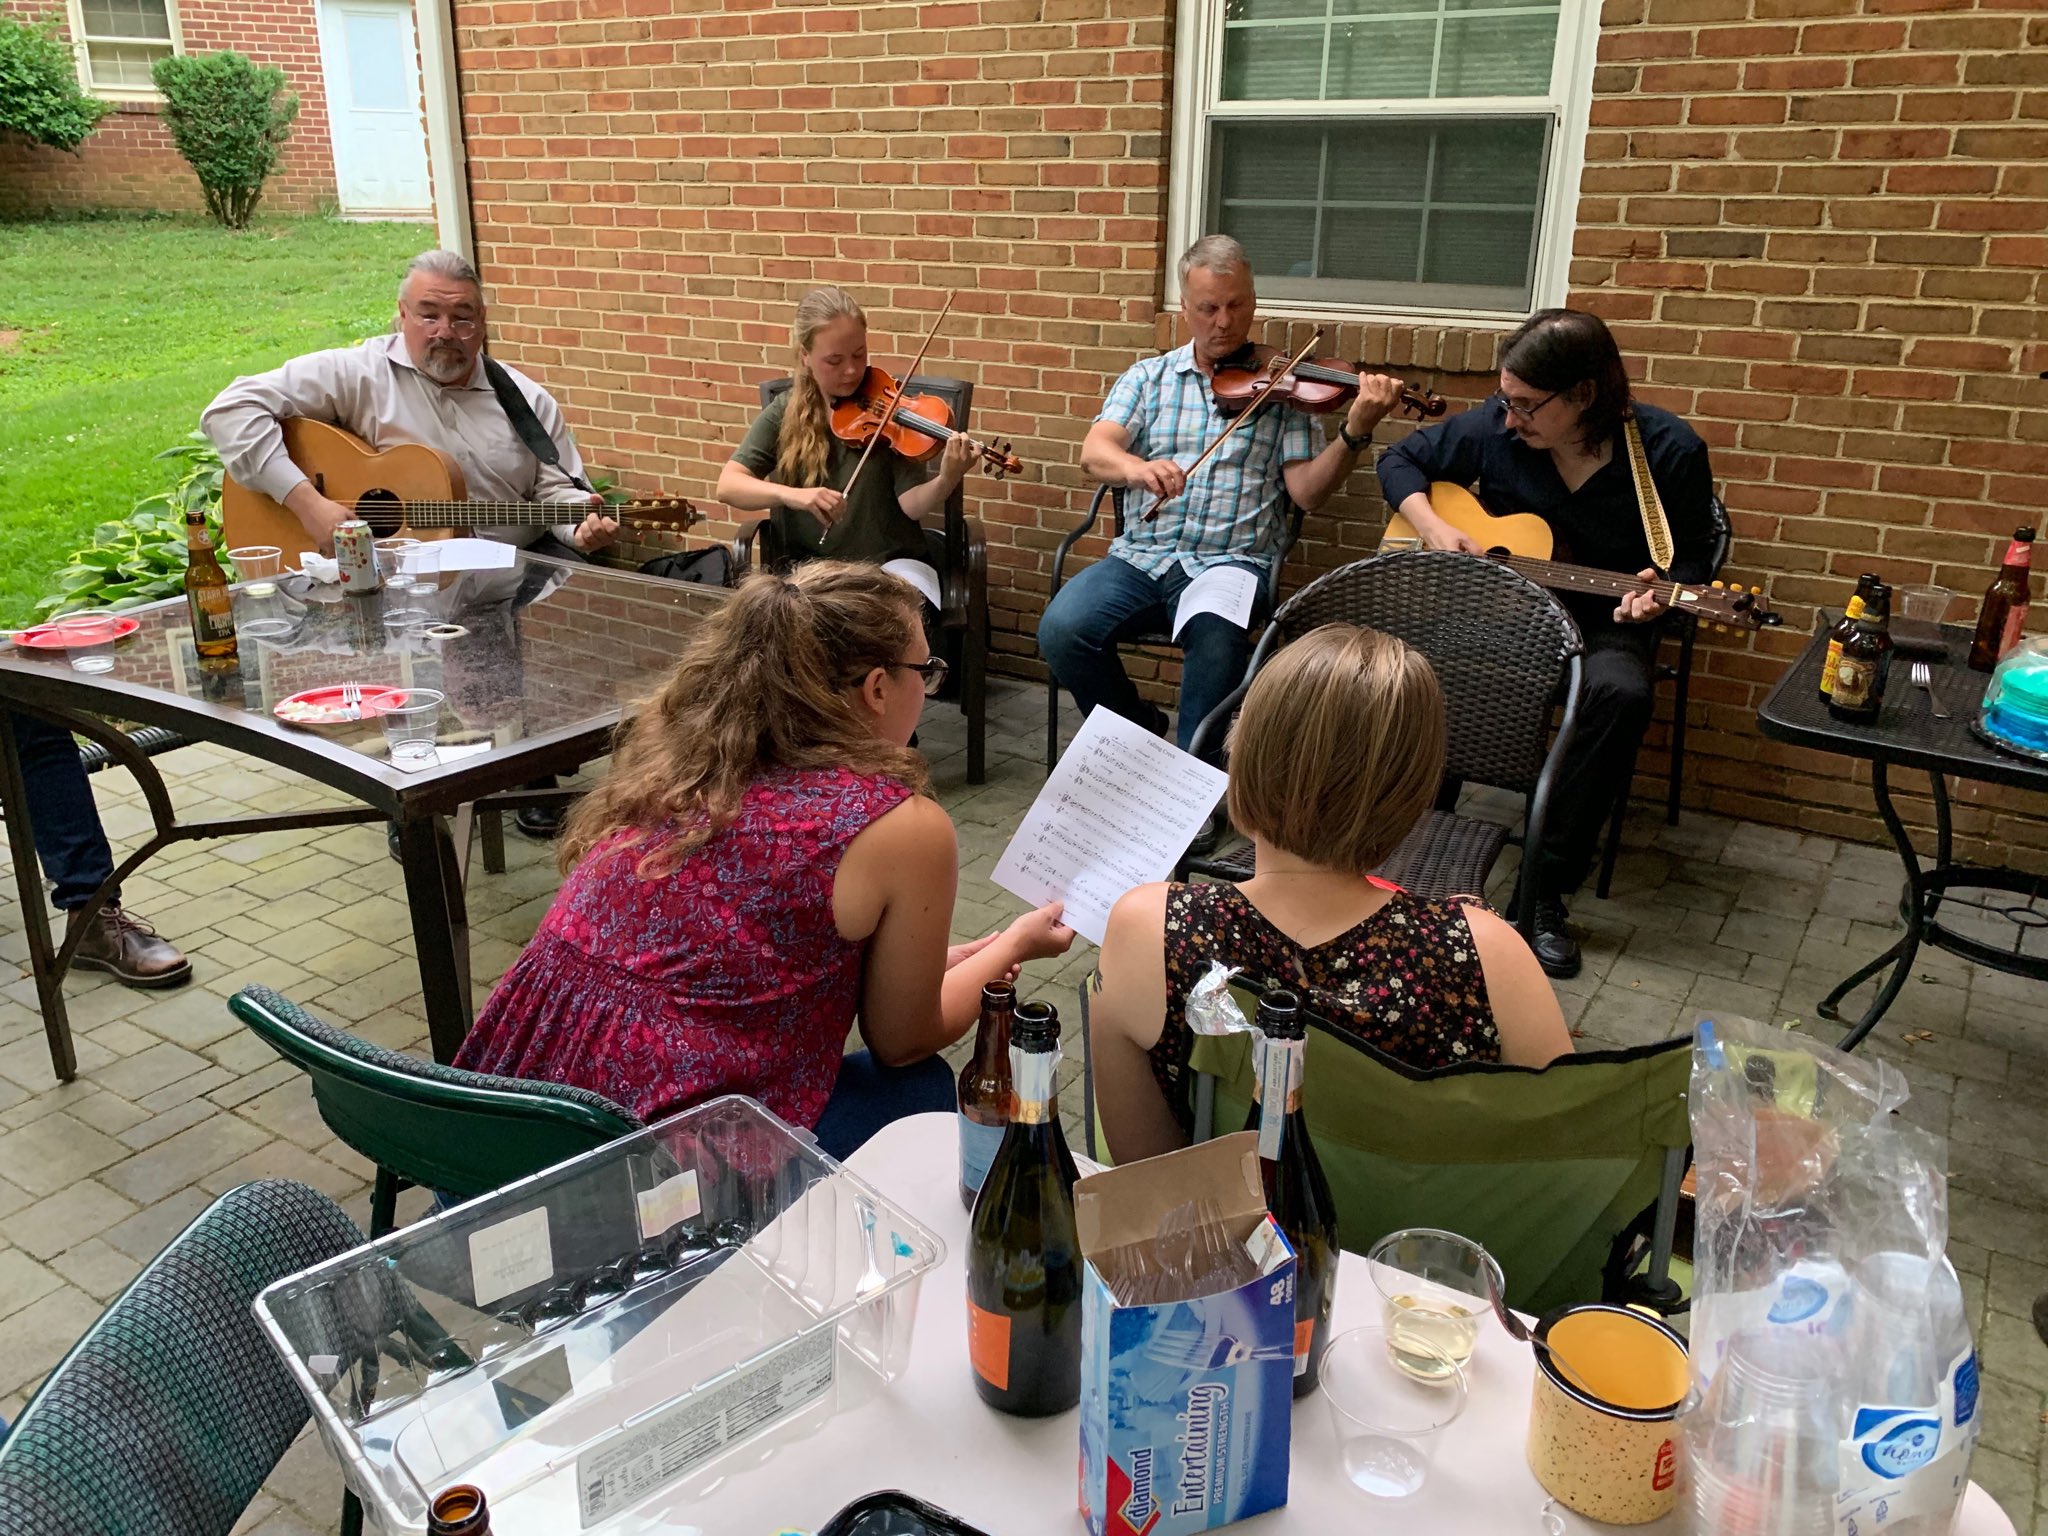 SmartReservoir.org  jam session - scientists & managers who play music together can forecast water quality together ⁦@eco4cast⁩ ⁦@GLEONetwork⁩ ⁦@pchanson1⁩ ⁦@CheckdatBookout⁩ ⁦@whittercritterr⁩ ⁦@planktongirl16⁩ ⁦@Seashells1111⁩